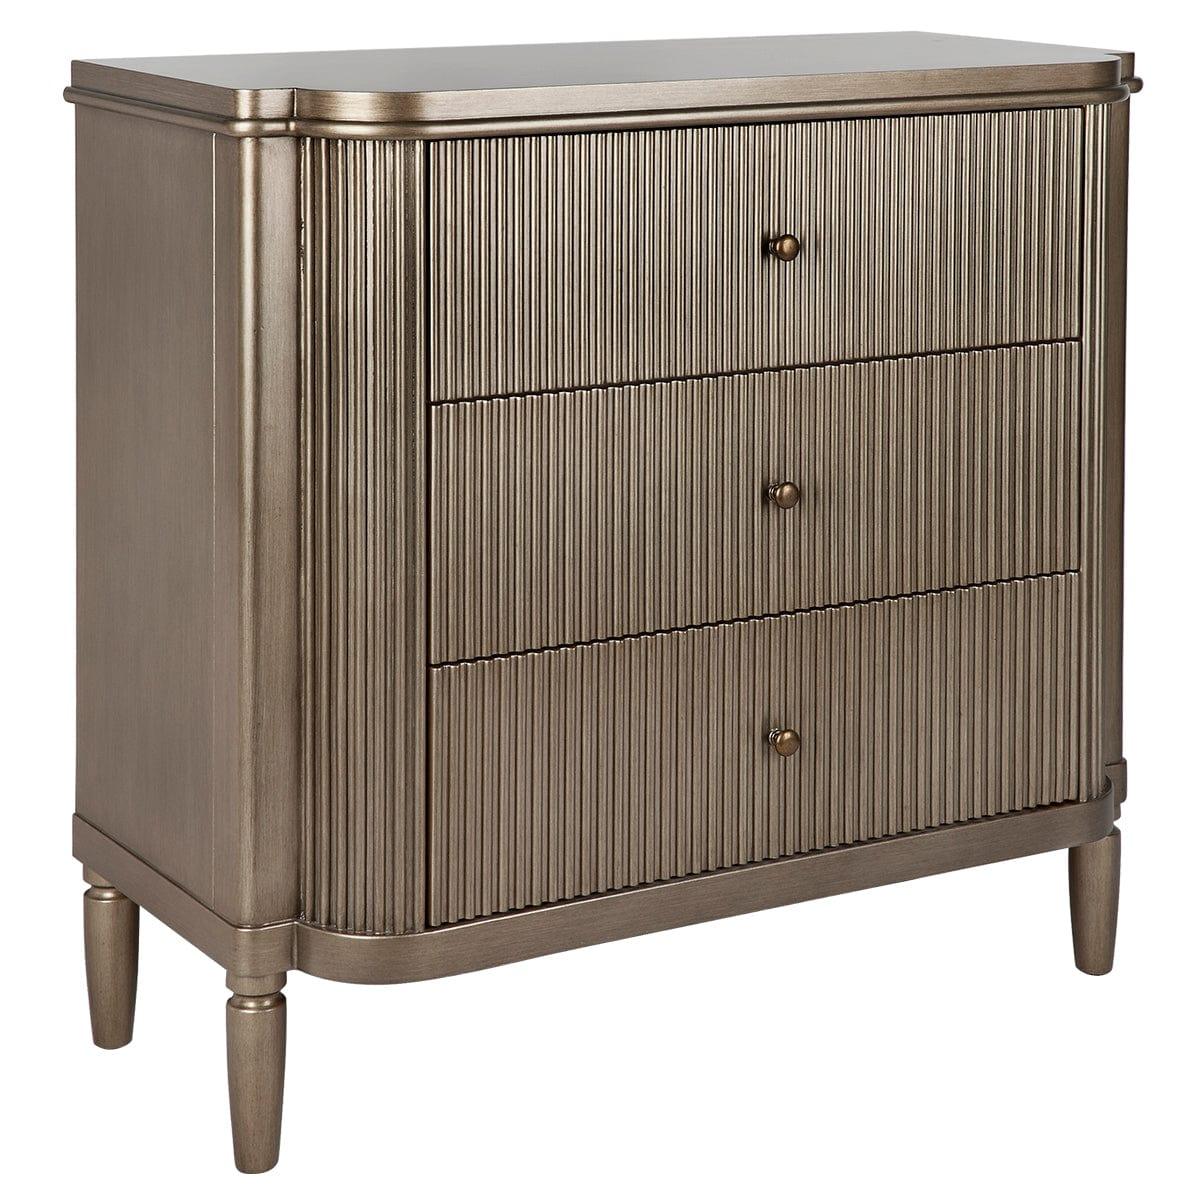 House Journey Arielle 3 Drawer Chest - Antique Gold